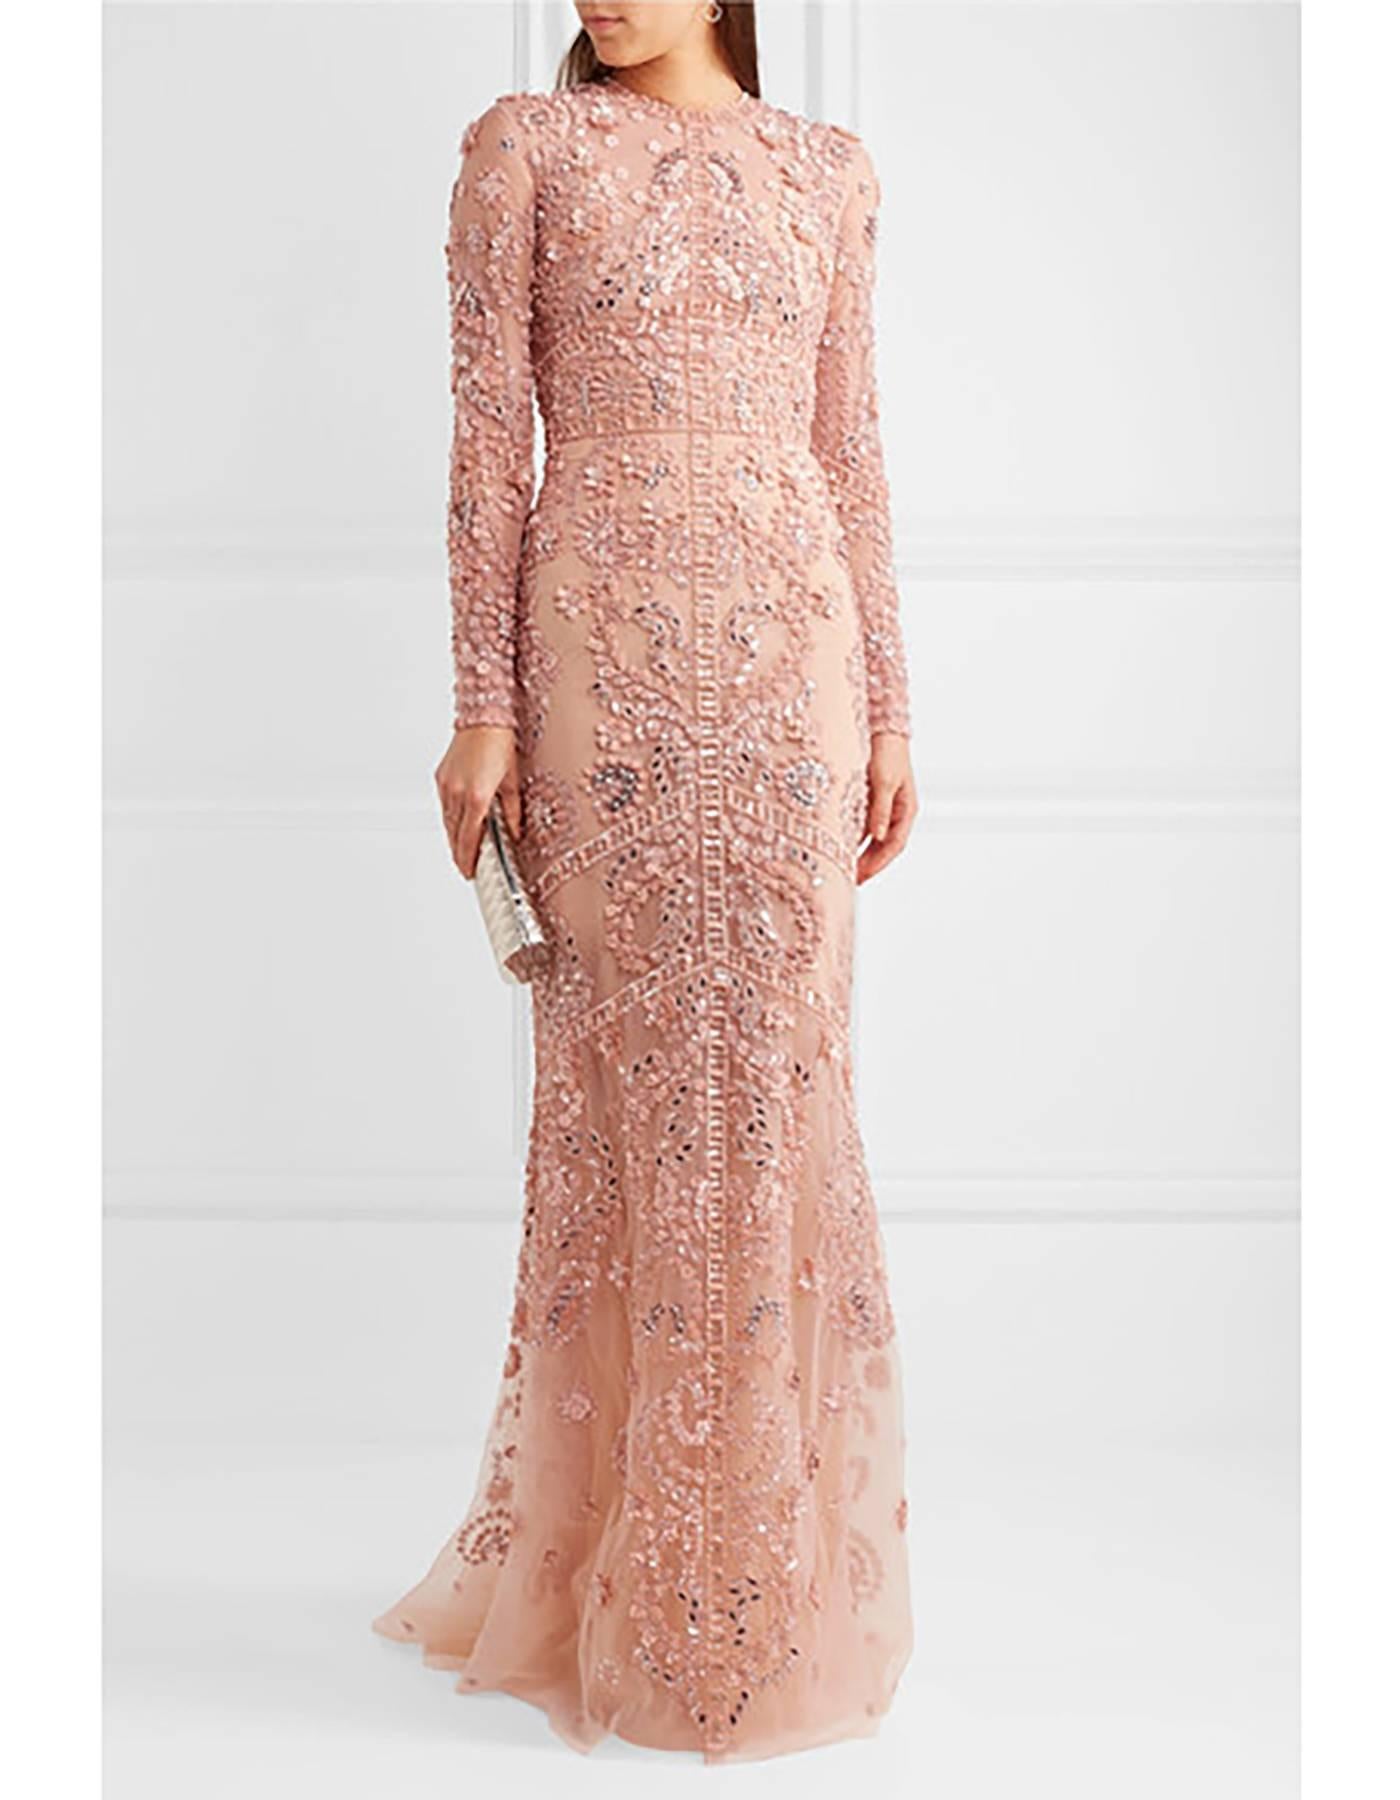 Zuhair Murad Blush Beaded Silk-Tulle Gown Sz US10 NWT

Features intricate beading and sequins throughout and matching underslip

Made In: Lebanon
Color: Blush
Composition: 50% Silk, 505 Polyamide
Closure/Opening: Back zip closure
Retail Price: